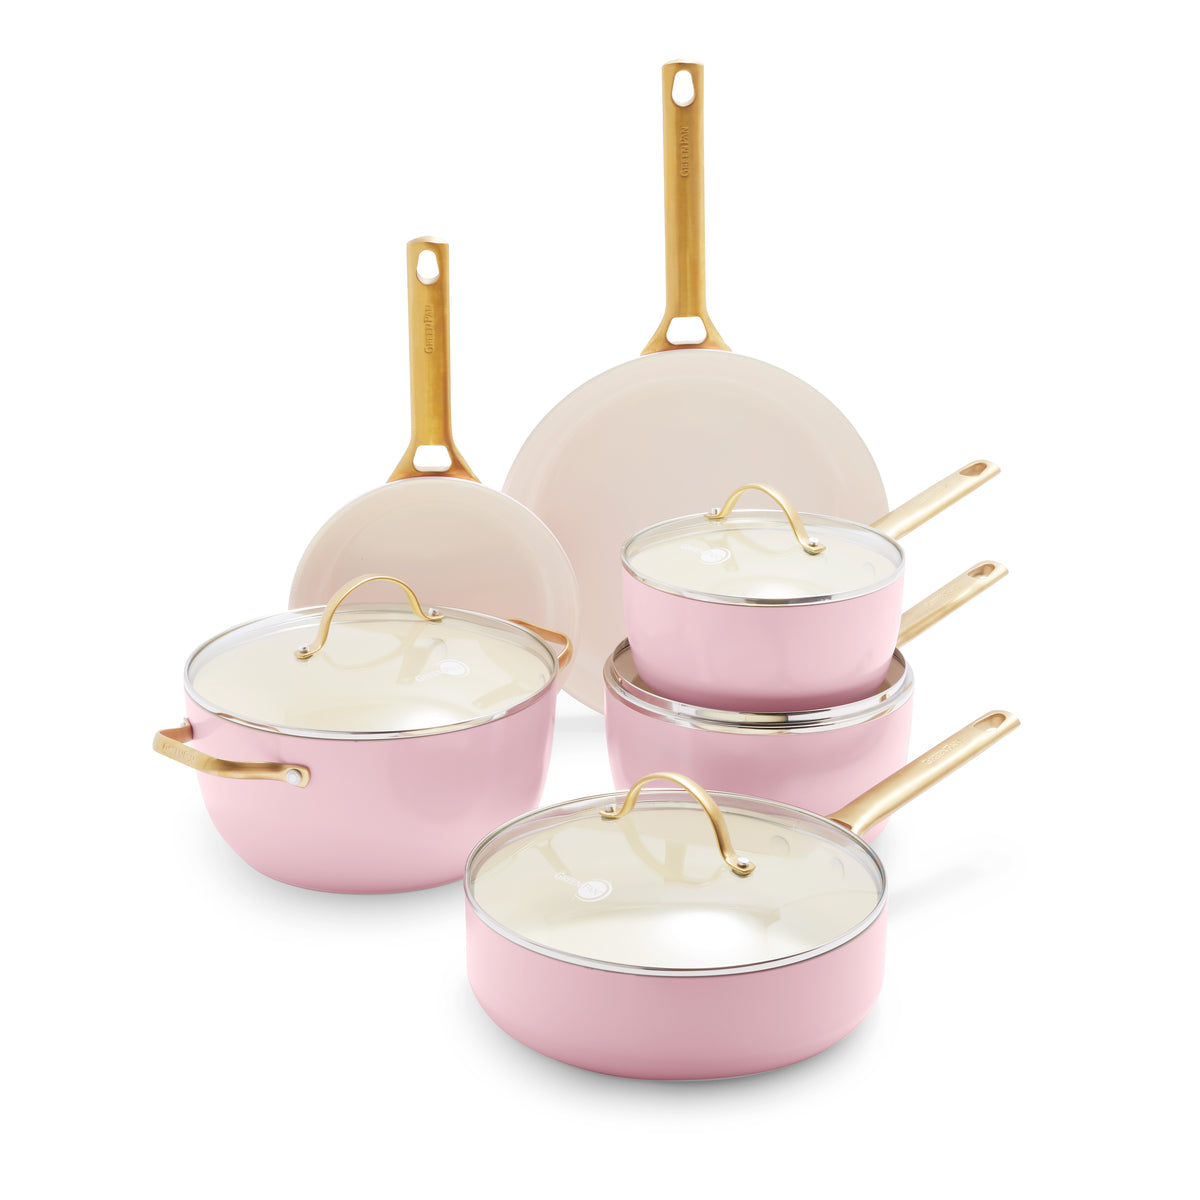 Reserve Ceramic Nonstick 10-Piece Cookware Set, Blush with Gold-Tone